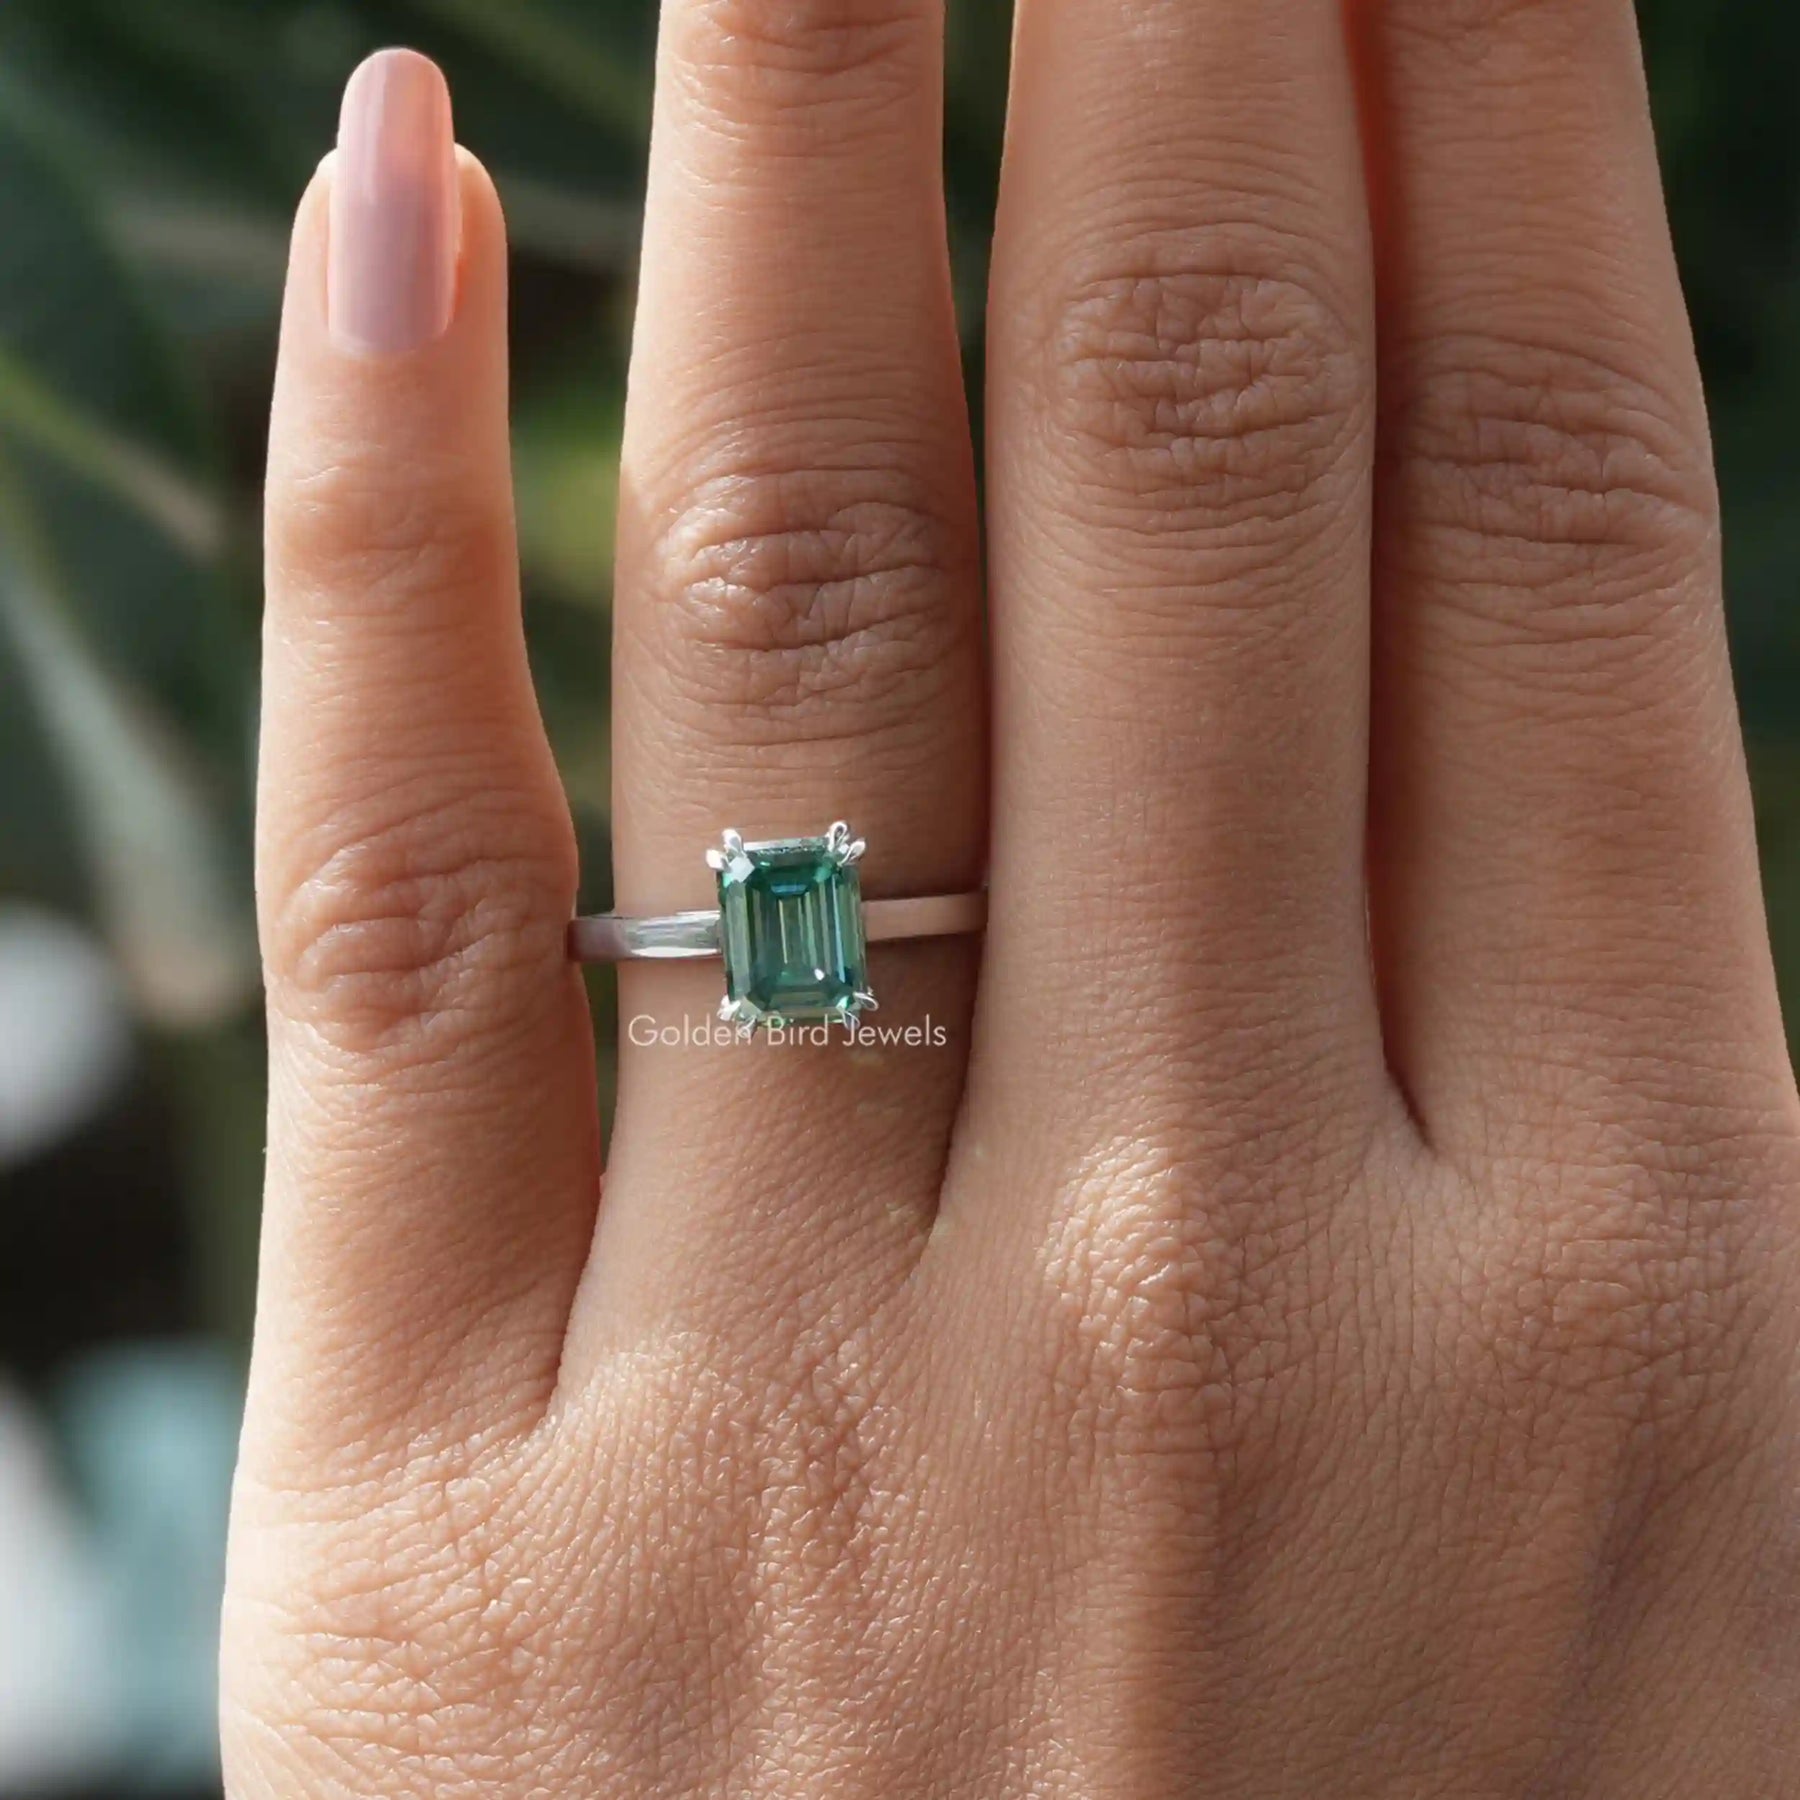 [Moissanite Emerald Cut Solitaire Engagement Ring In White Gold]-[Golden Bird Jewels]